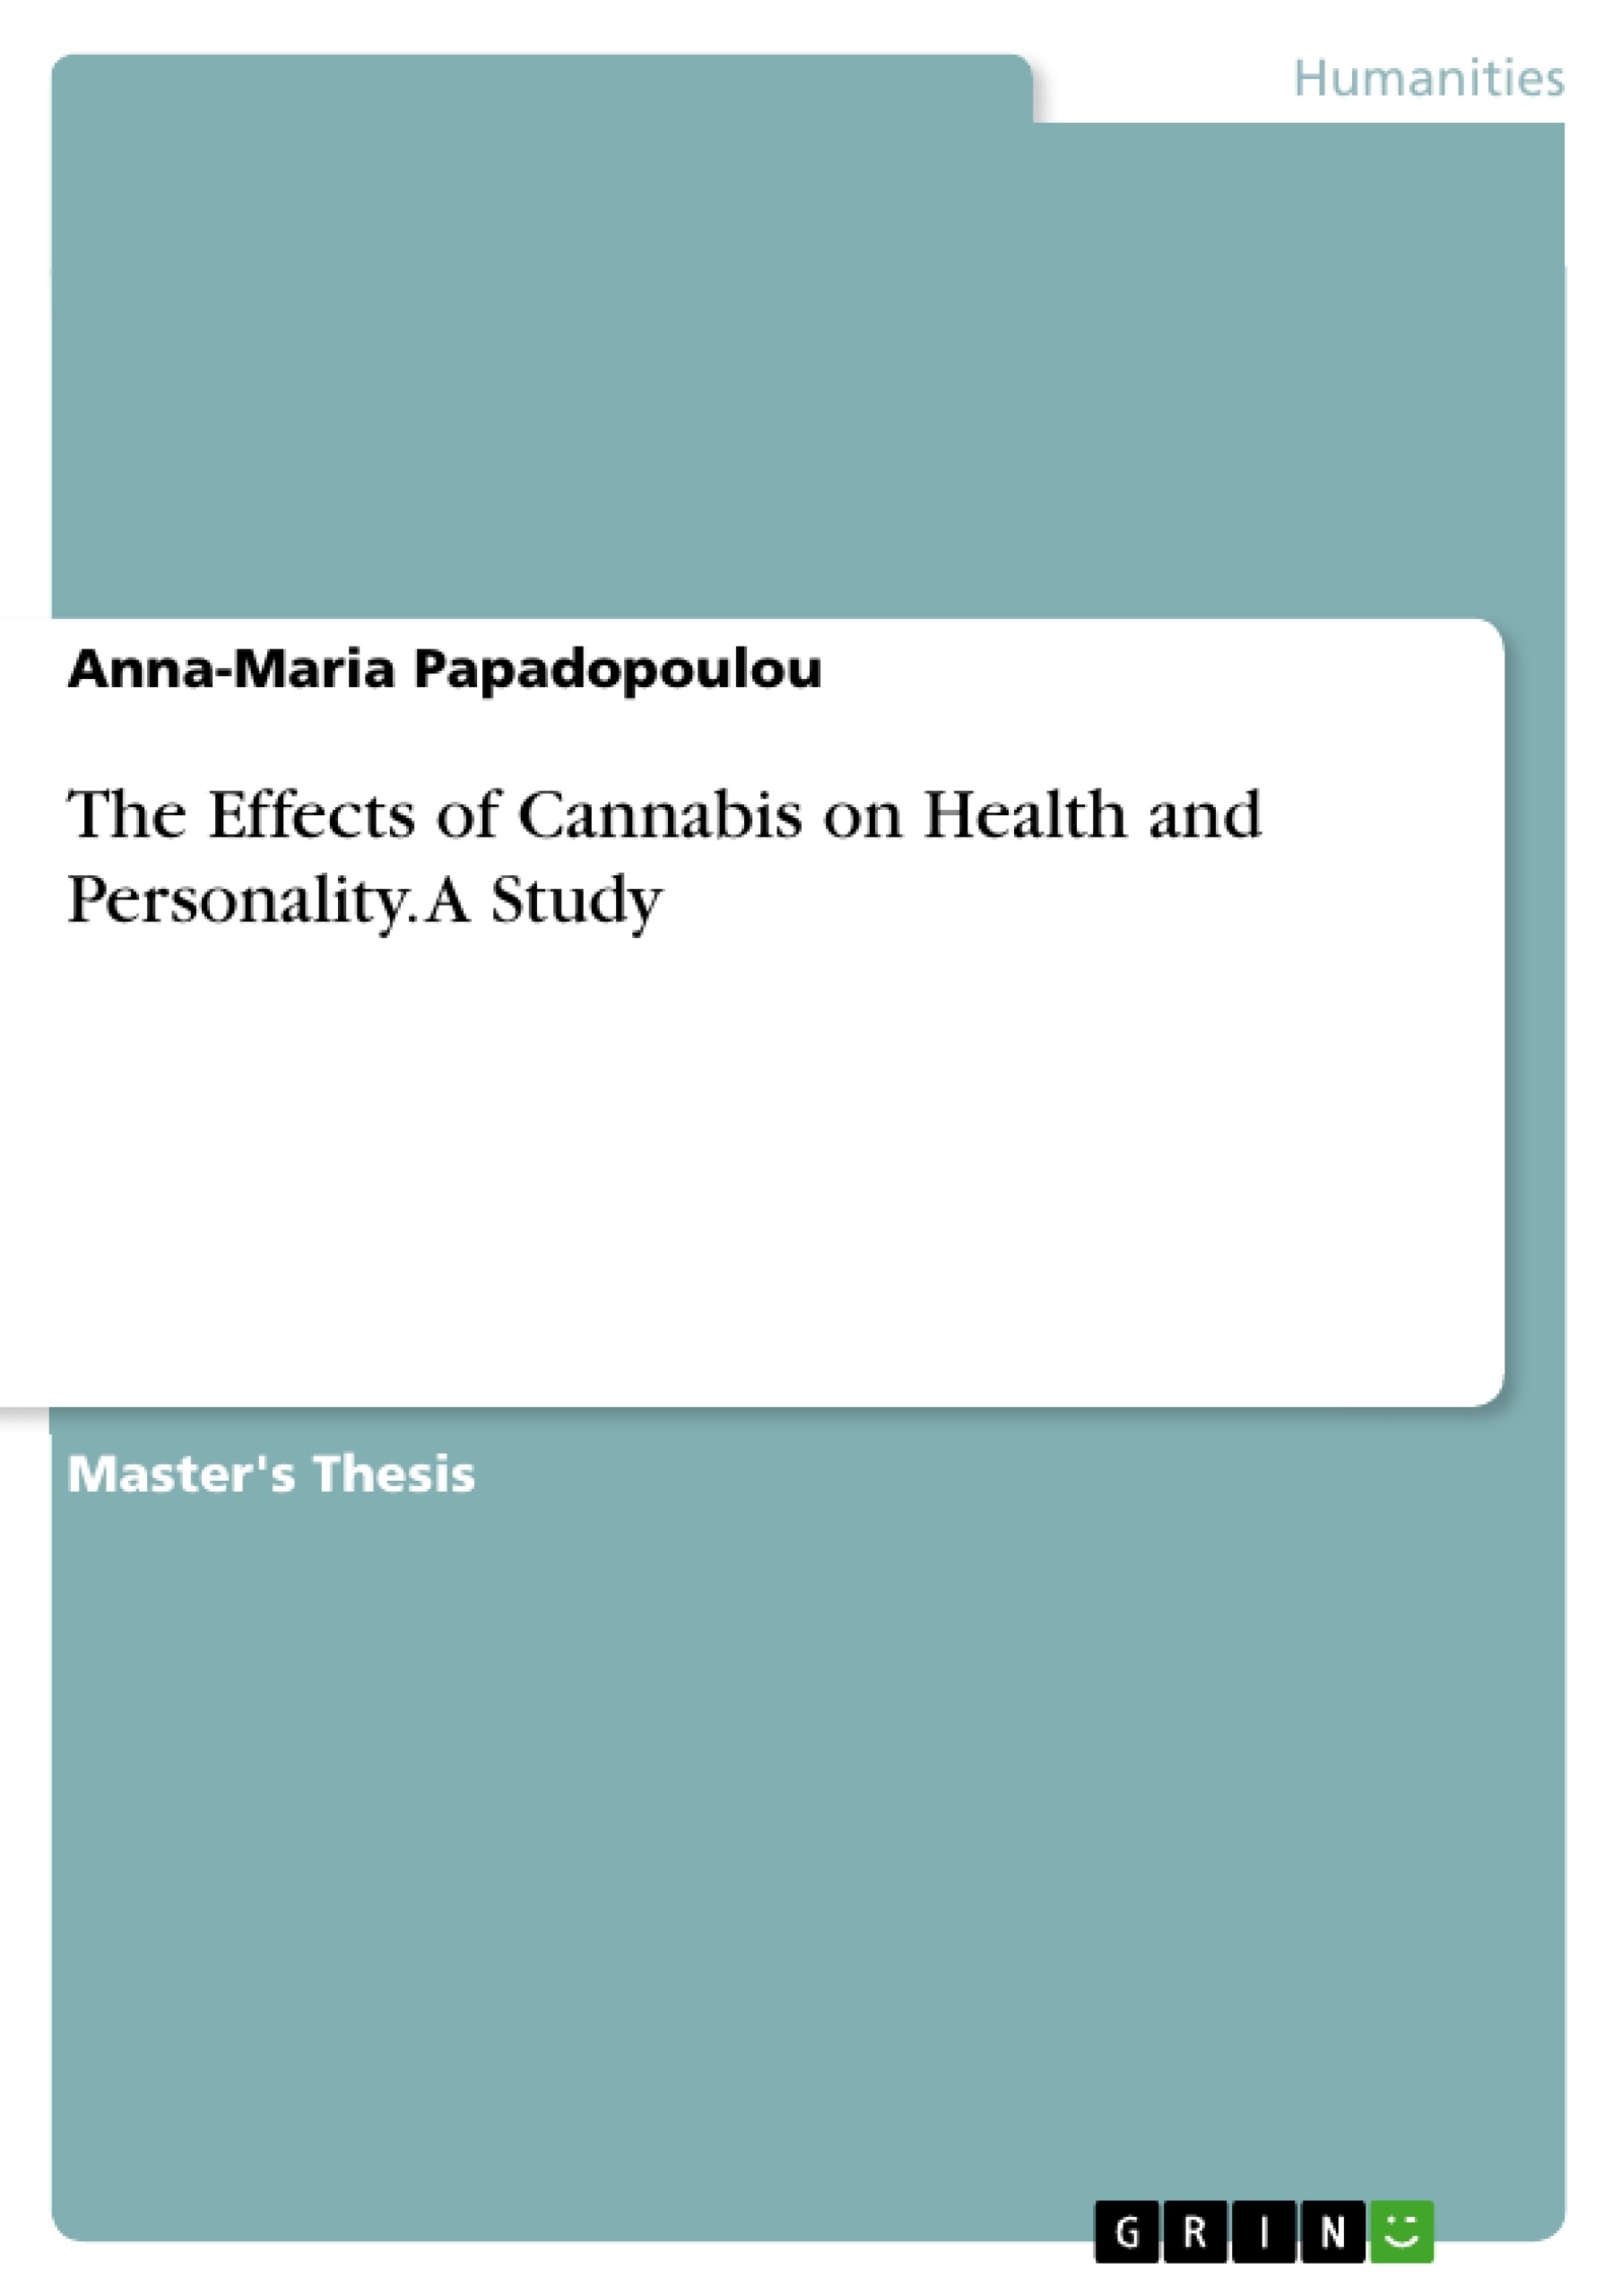 Titre: The Effects of Cannabis on Health and Personality. A Study